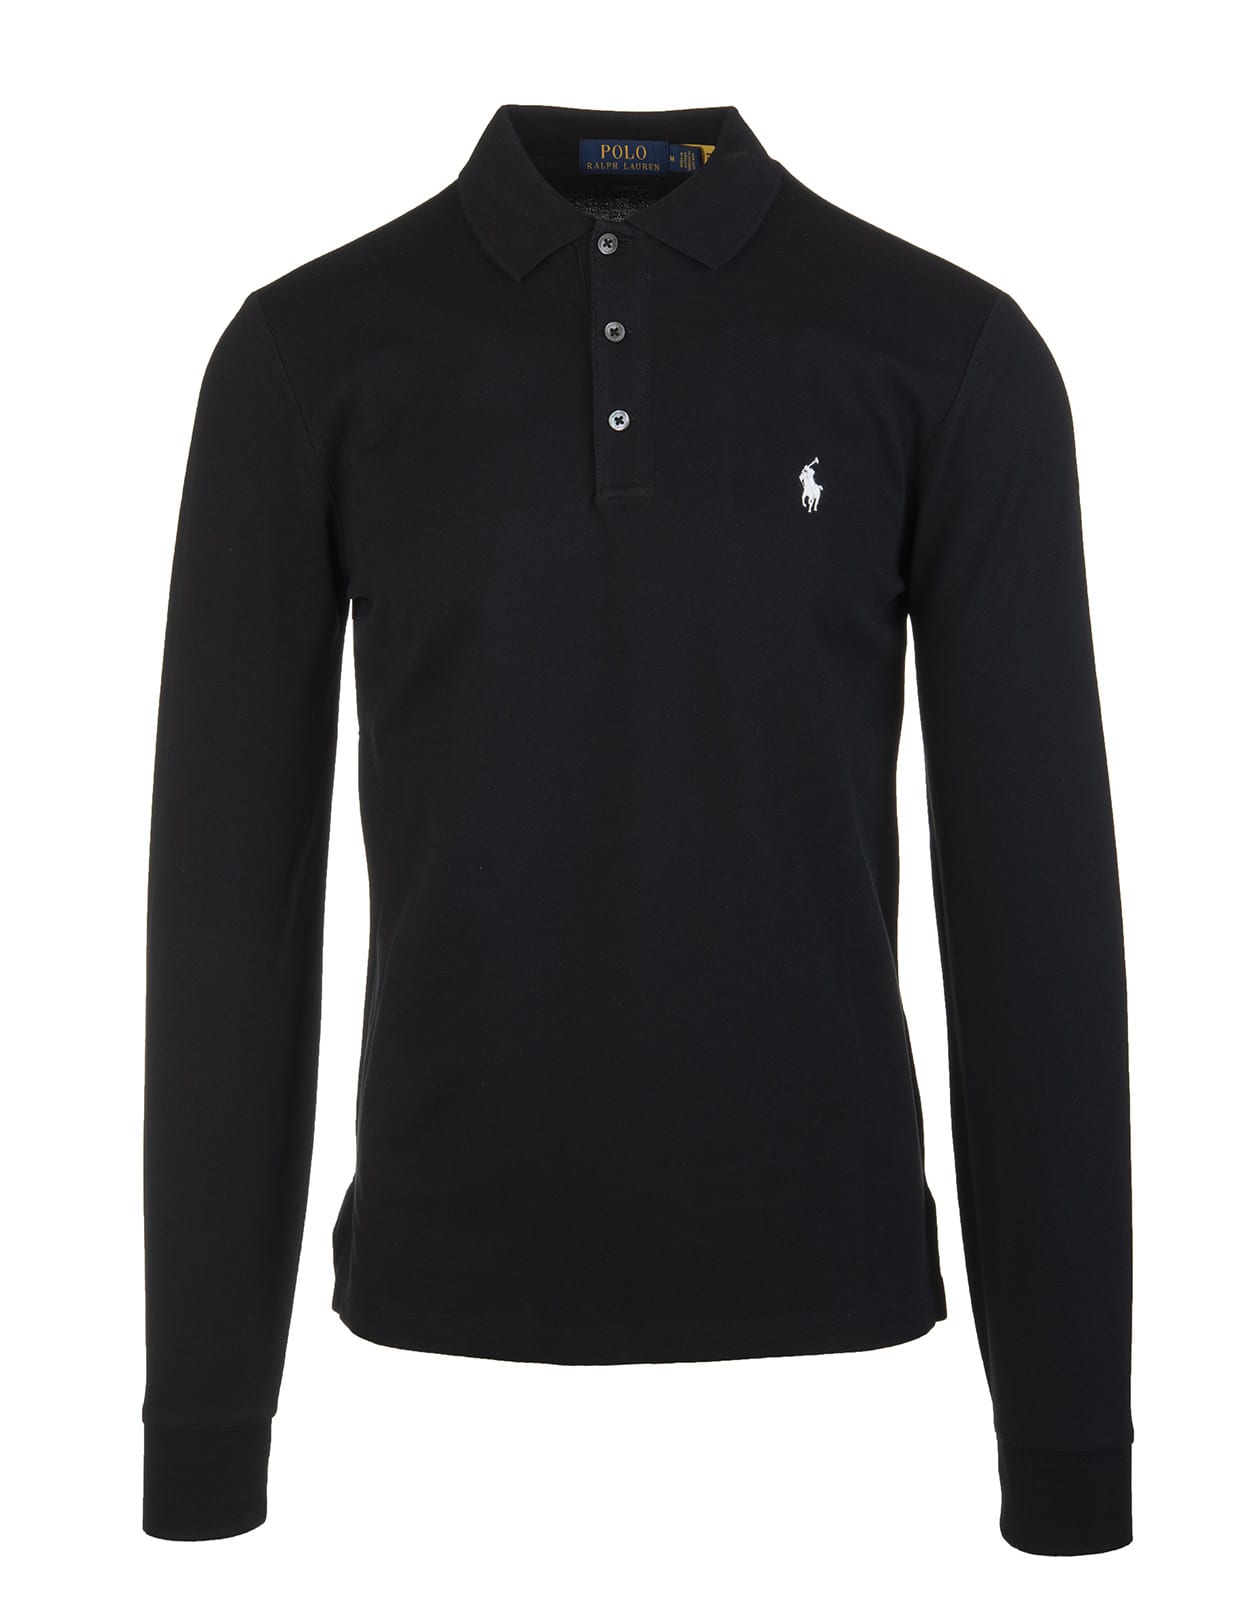 Ralph Lauren Black Long Sleeve Polo In Pique With White Pony